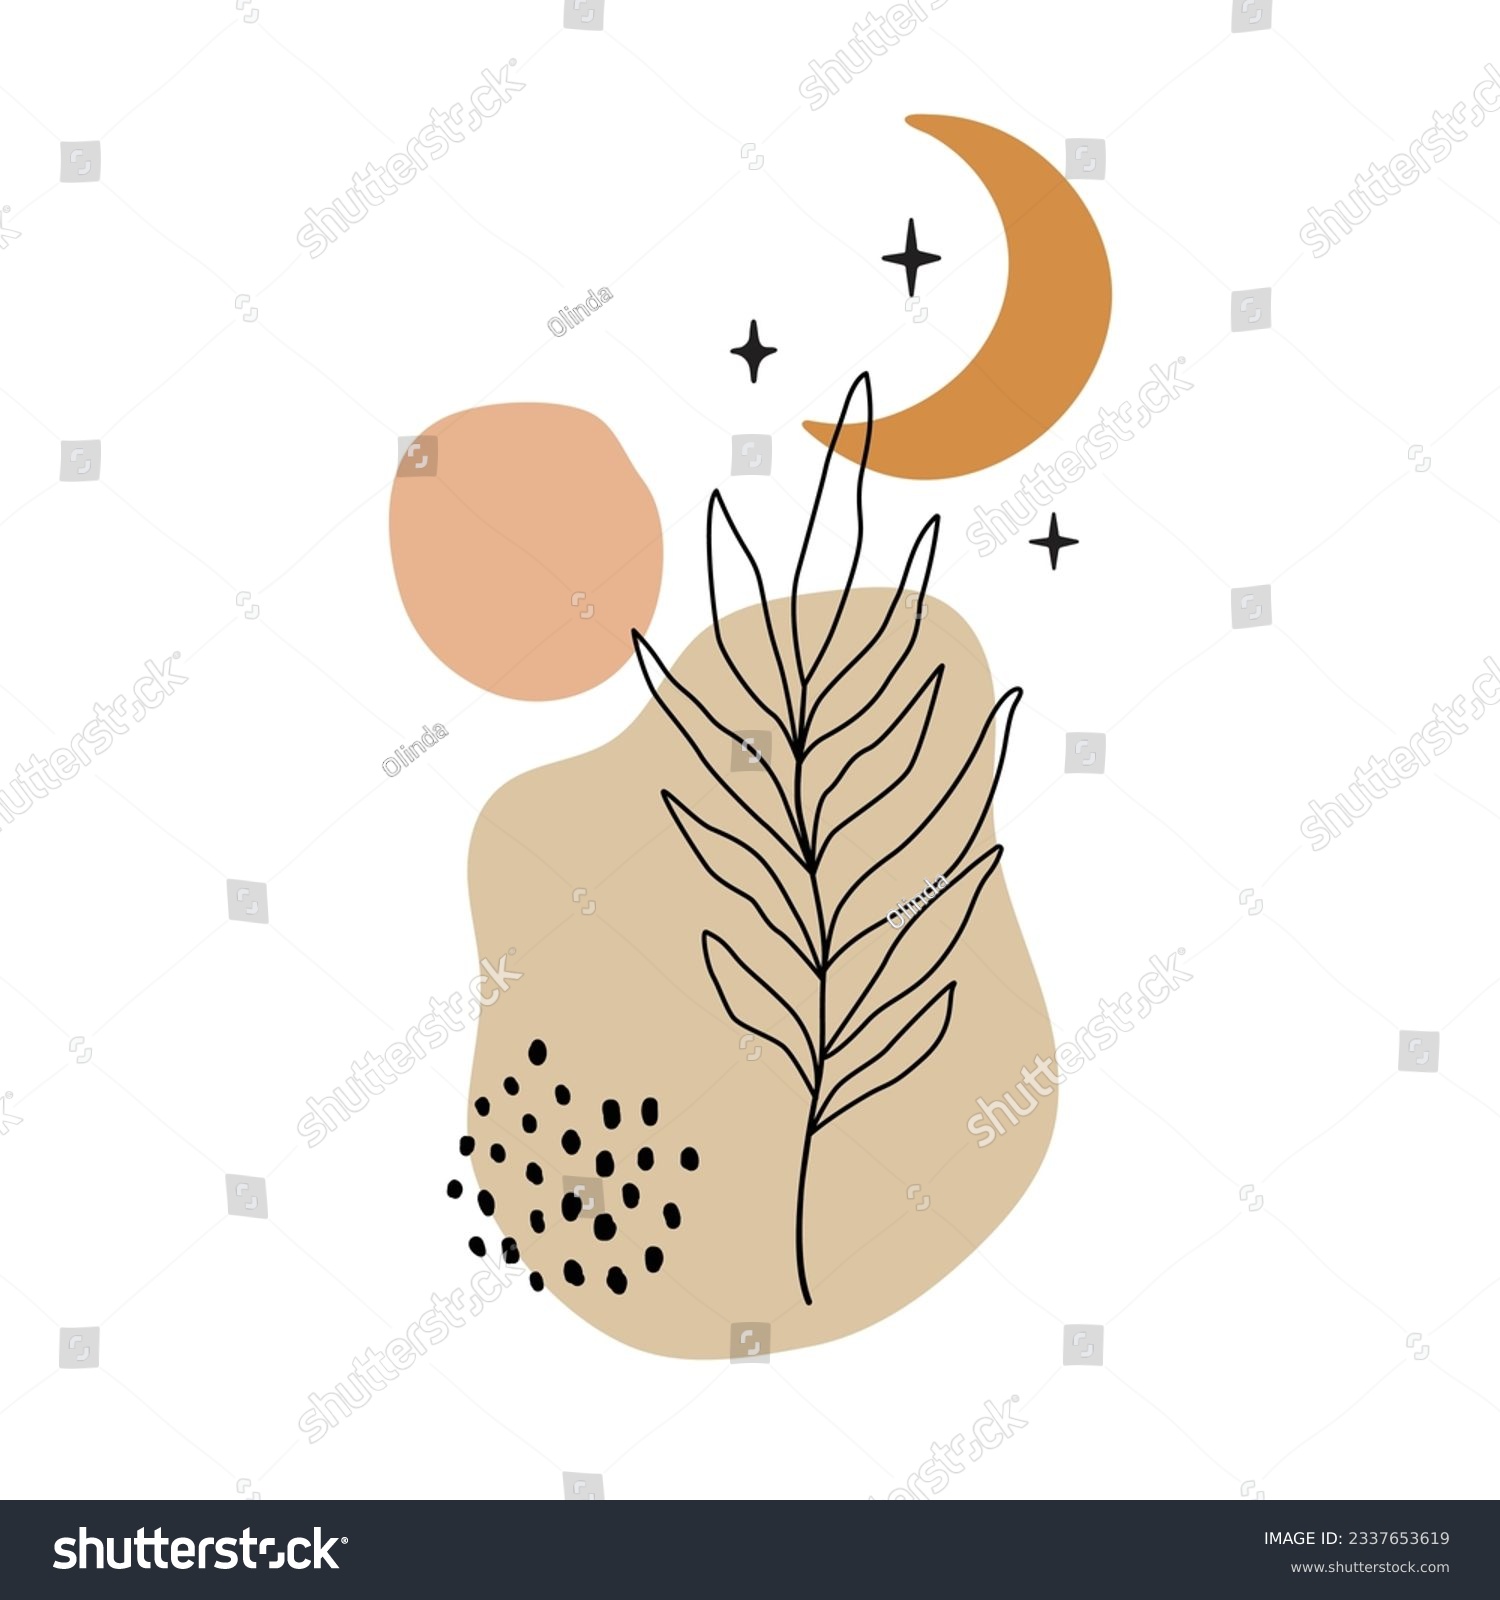 SVG of Vector illustration of crescent moon moon with stars sun plant. Design element for logos icons. Modern Boho style doodle art svg